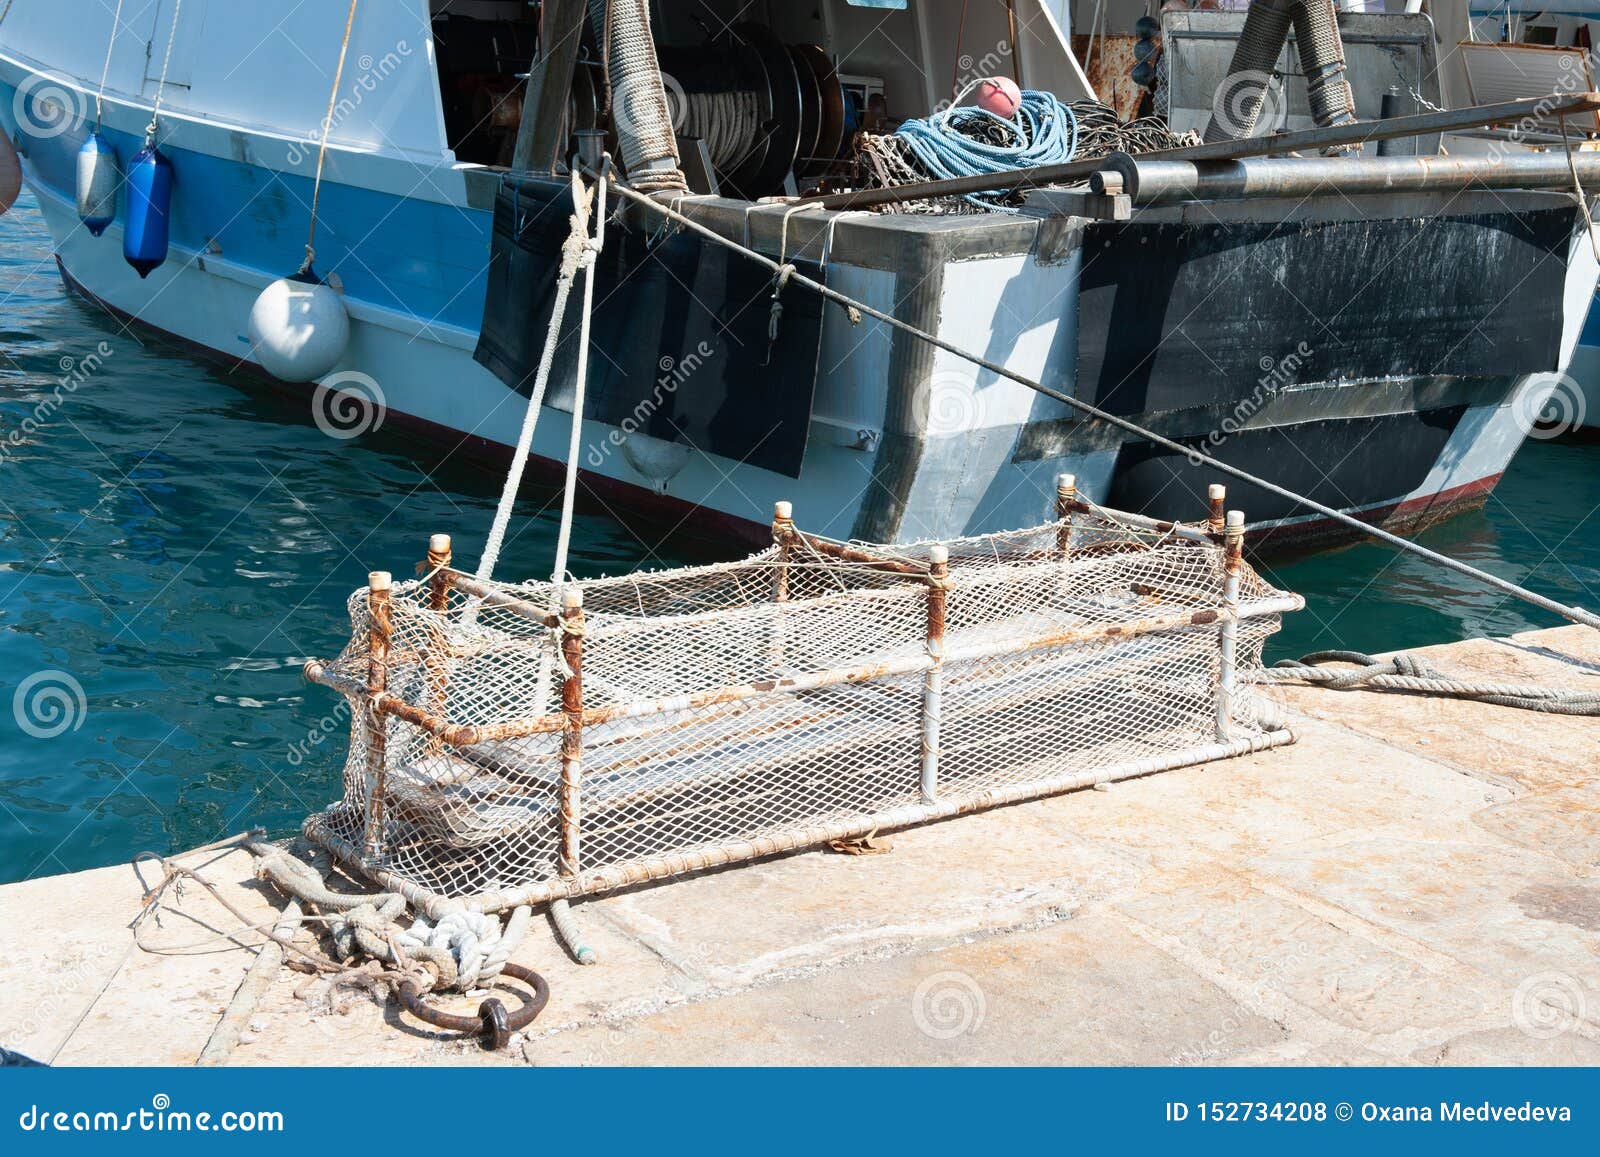 https://thumbs.dreamstime.com/z/old-fishing-tackle-nets-frame-dried-pier-sea-small-business-152734208.jpg